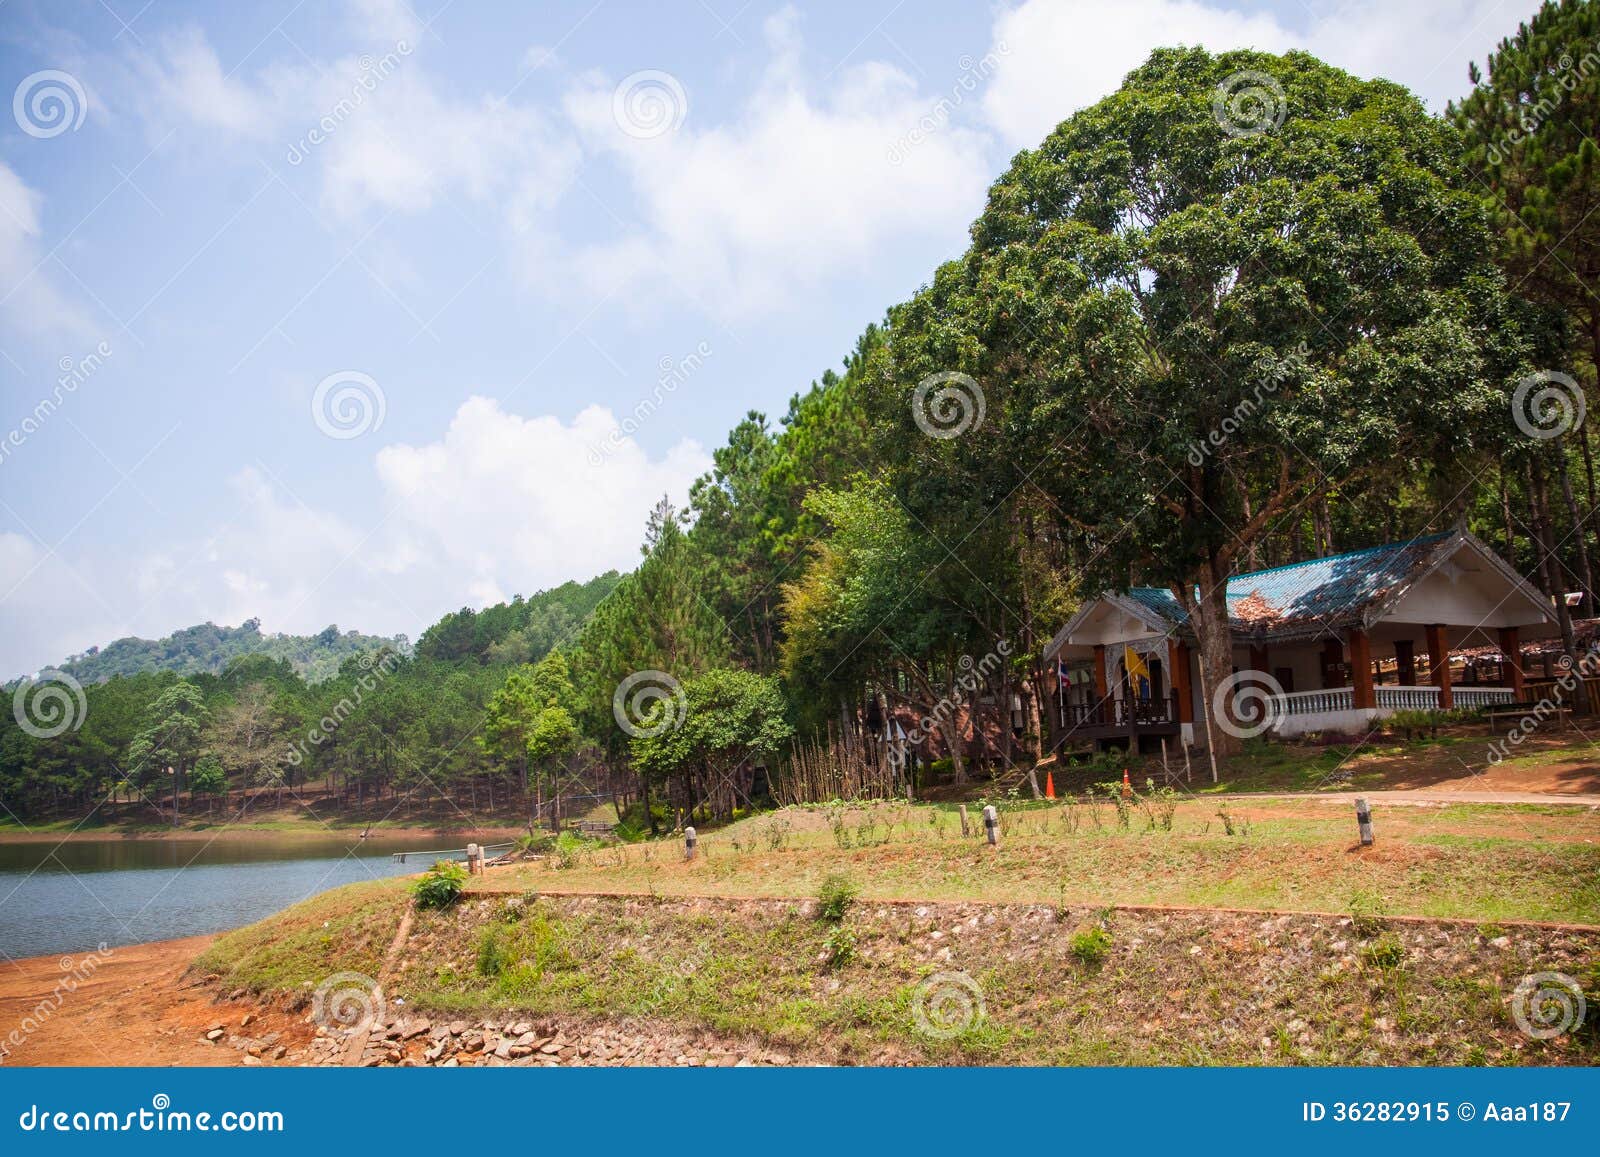 Beautiful Natural Scene Of Greenery Forest And Lake Royalty Free Stock